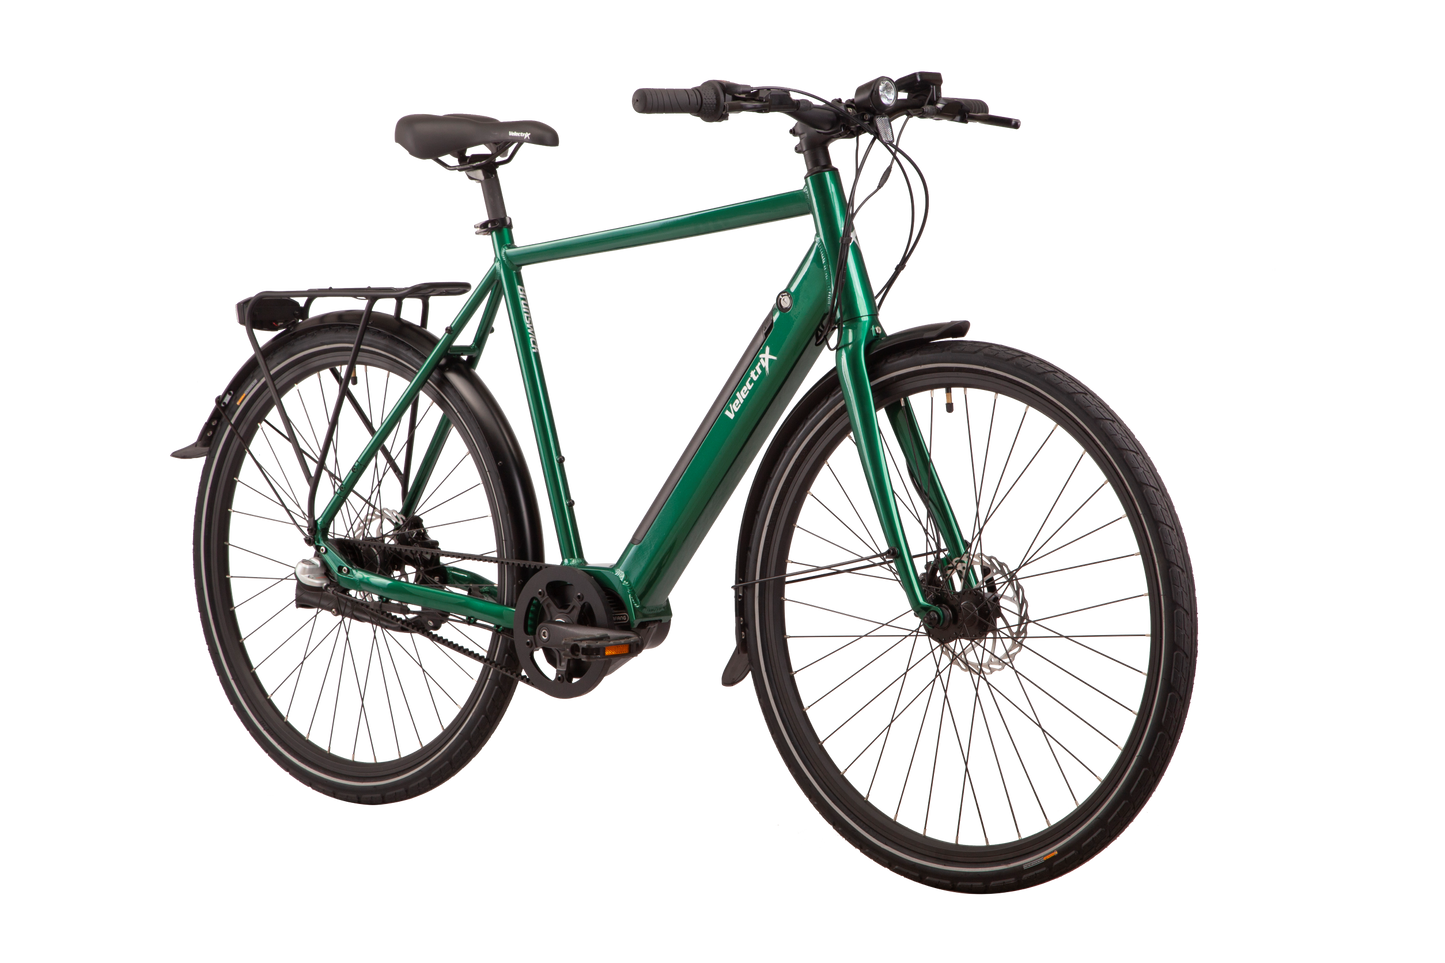 The 23 Brunswick Green electric bicycle from VeletriX is a great alternative form of transport for the daily commute to and from work  